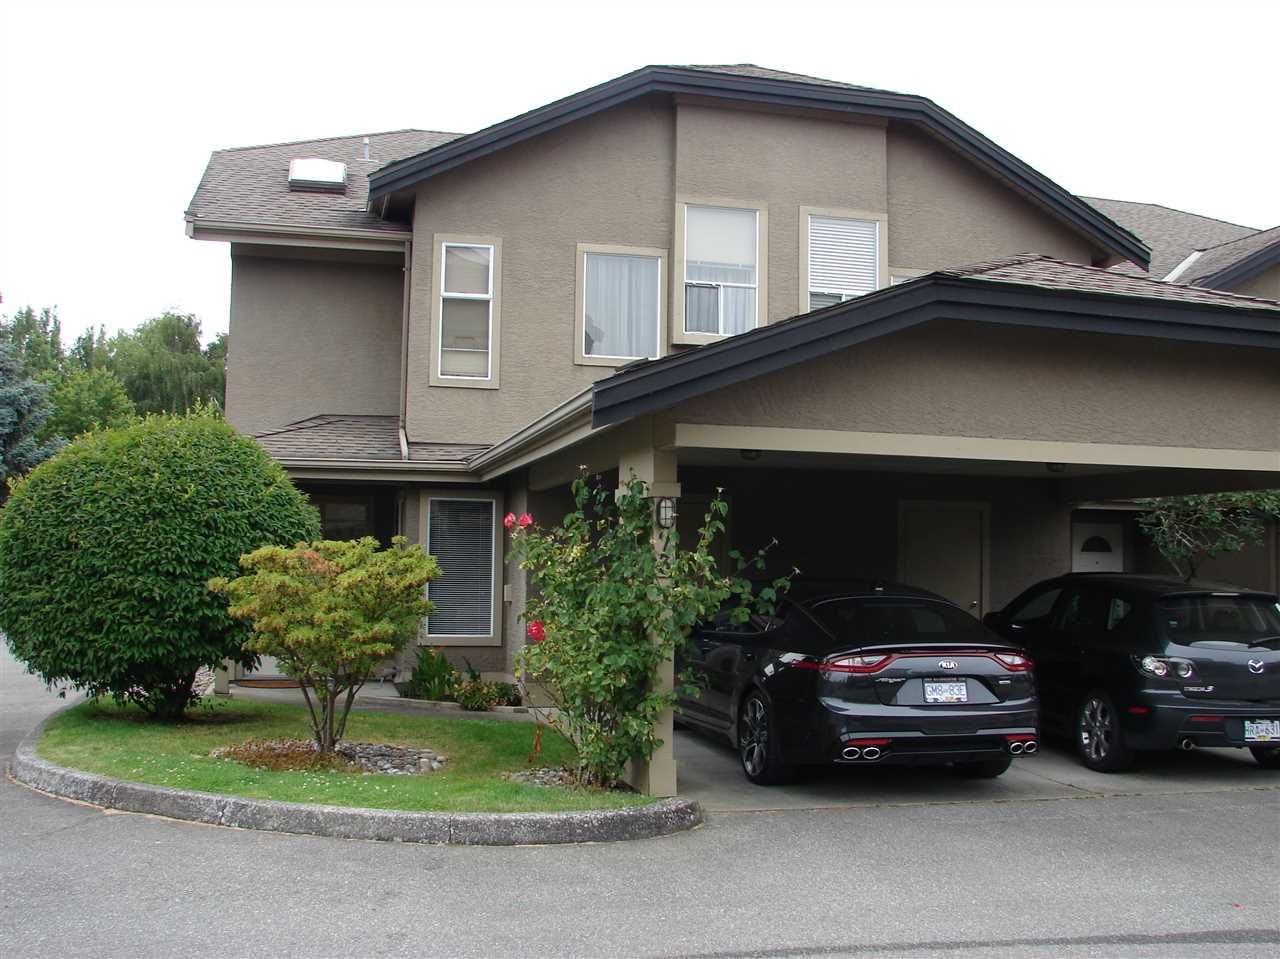 Main Photo: 23 12880 RAILWAY AVENUE in : Steveston South Townhouse for sale : MLS®# R2413049